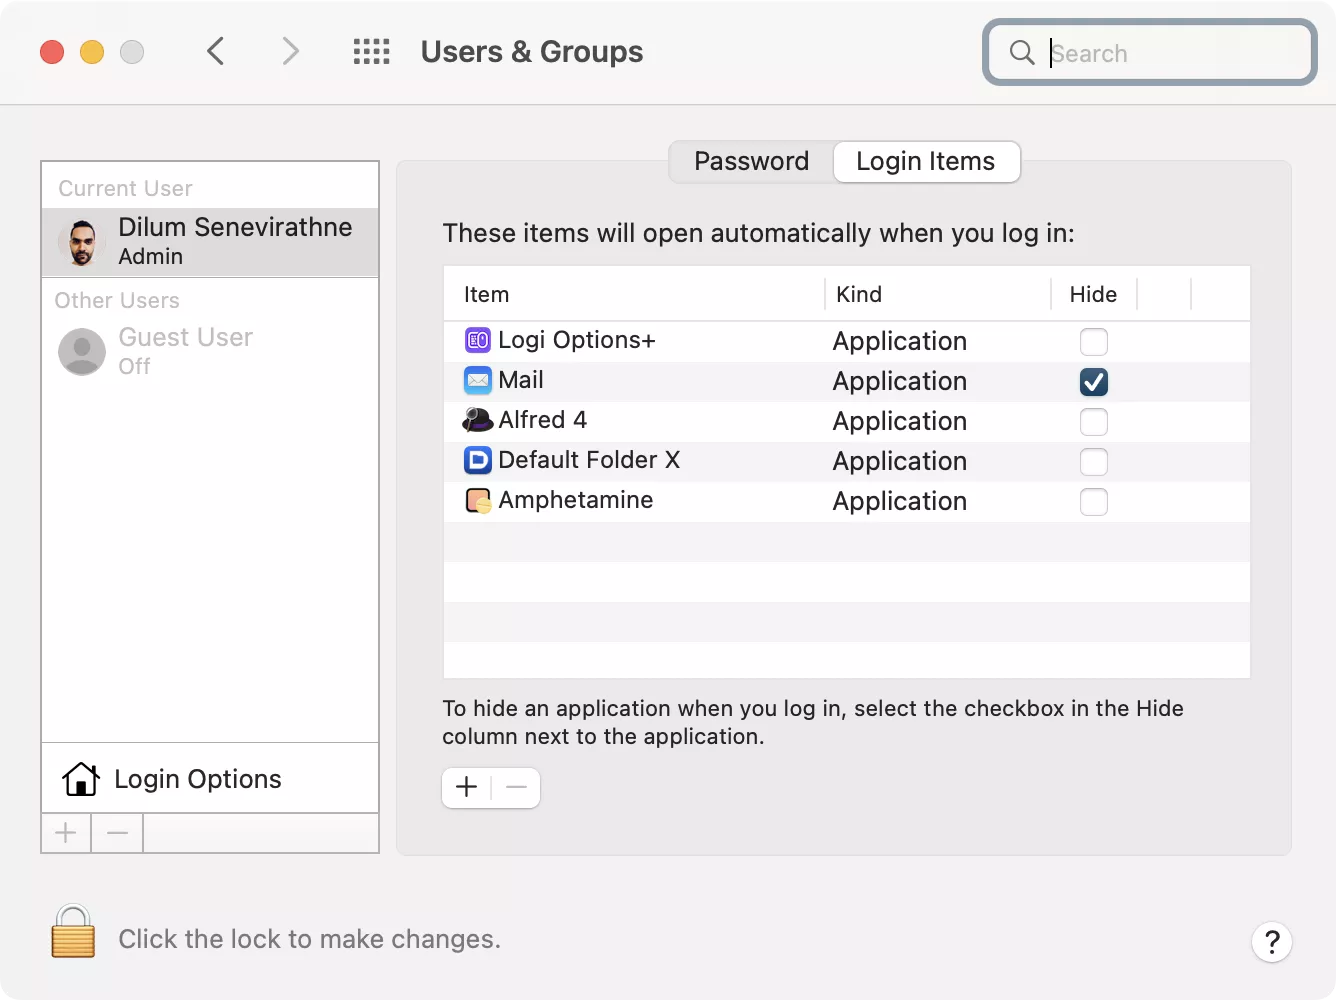 System Preferences > Users & Groups > Login Items